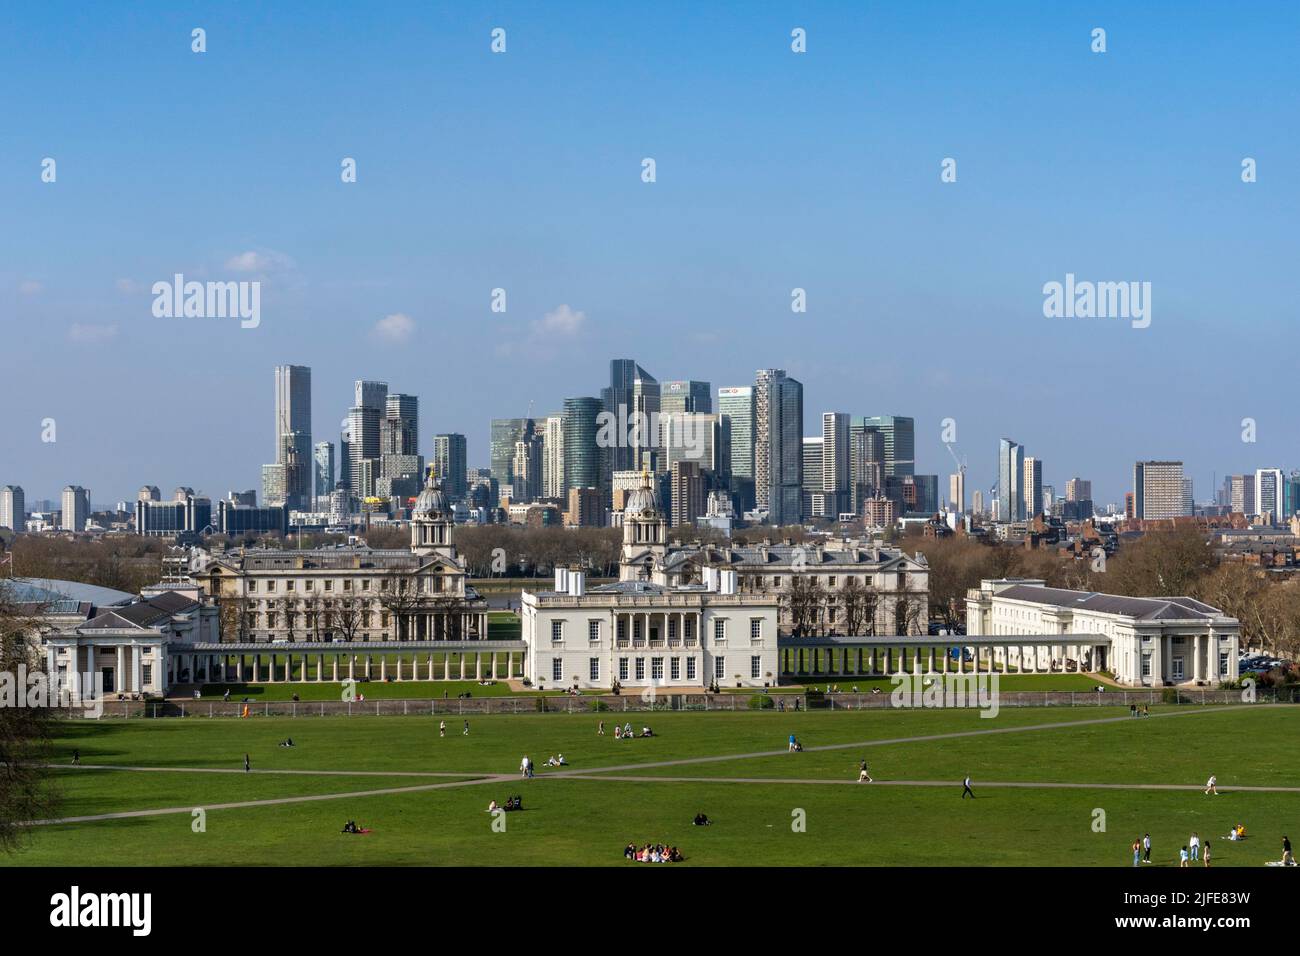 Greenwich Park in East London crisscrossed with paths showing the Queens building and Canary Wharf in the distance on a clear blue sky spring day. Stock Photo